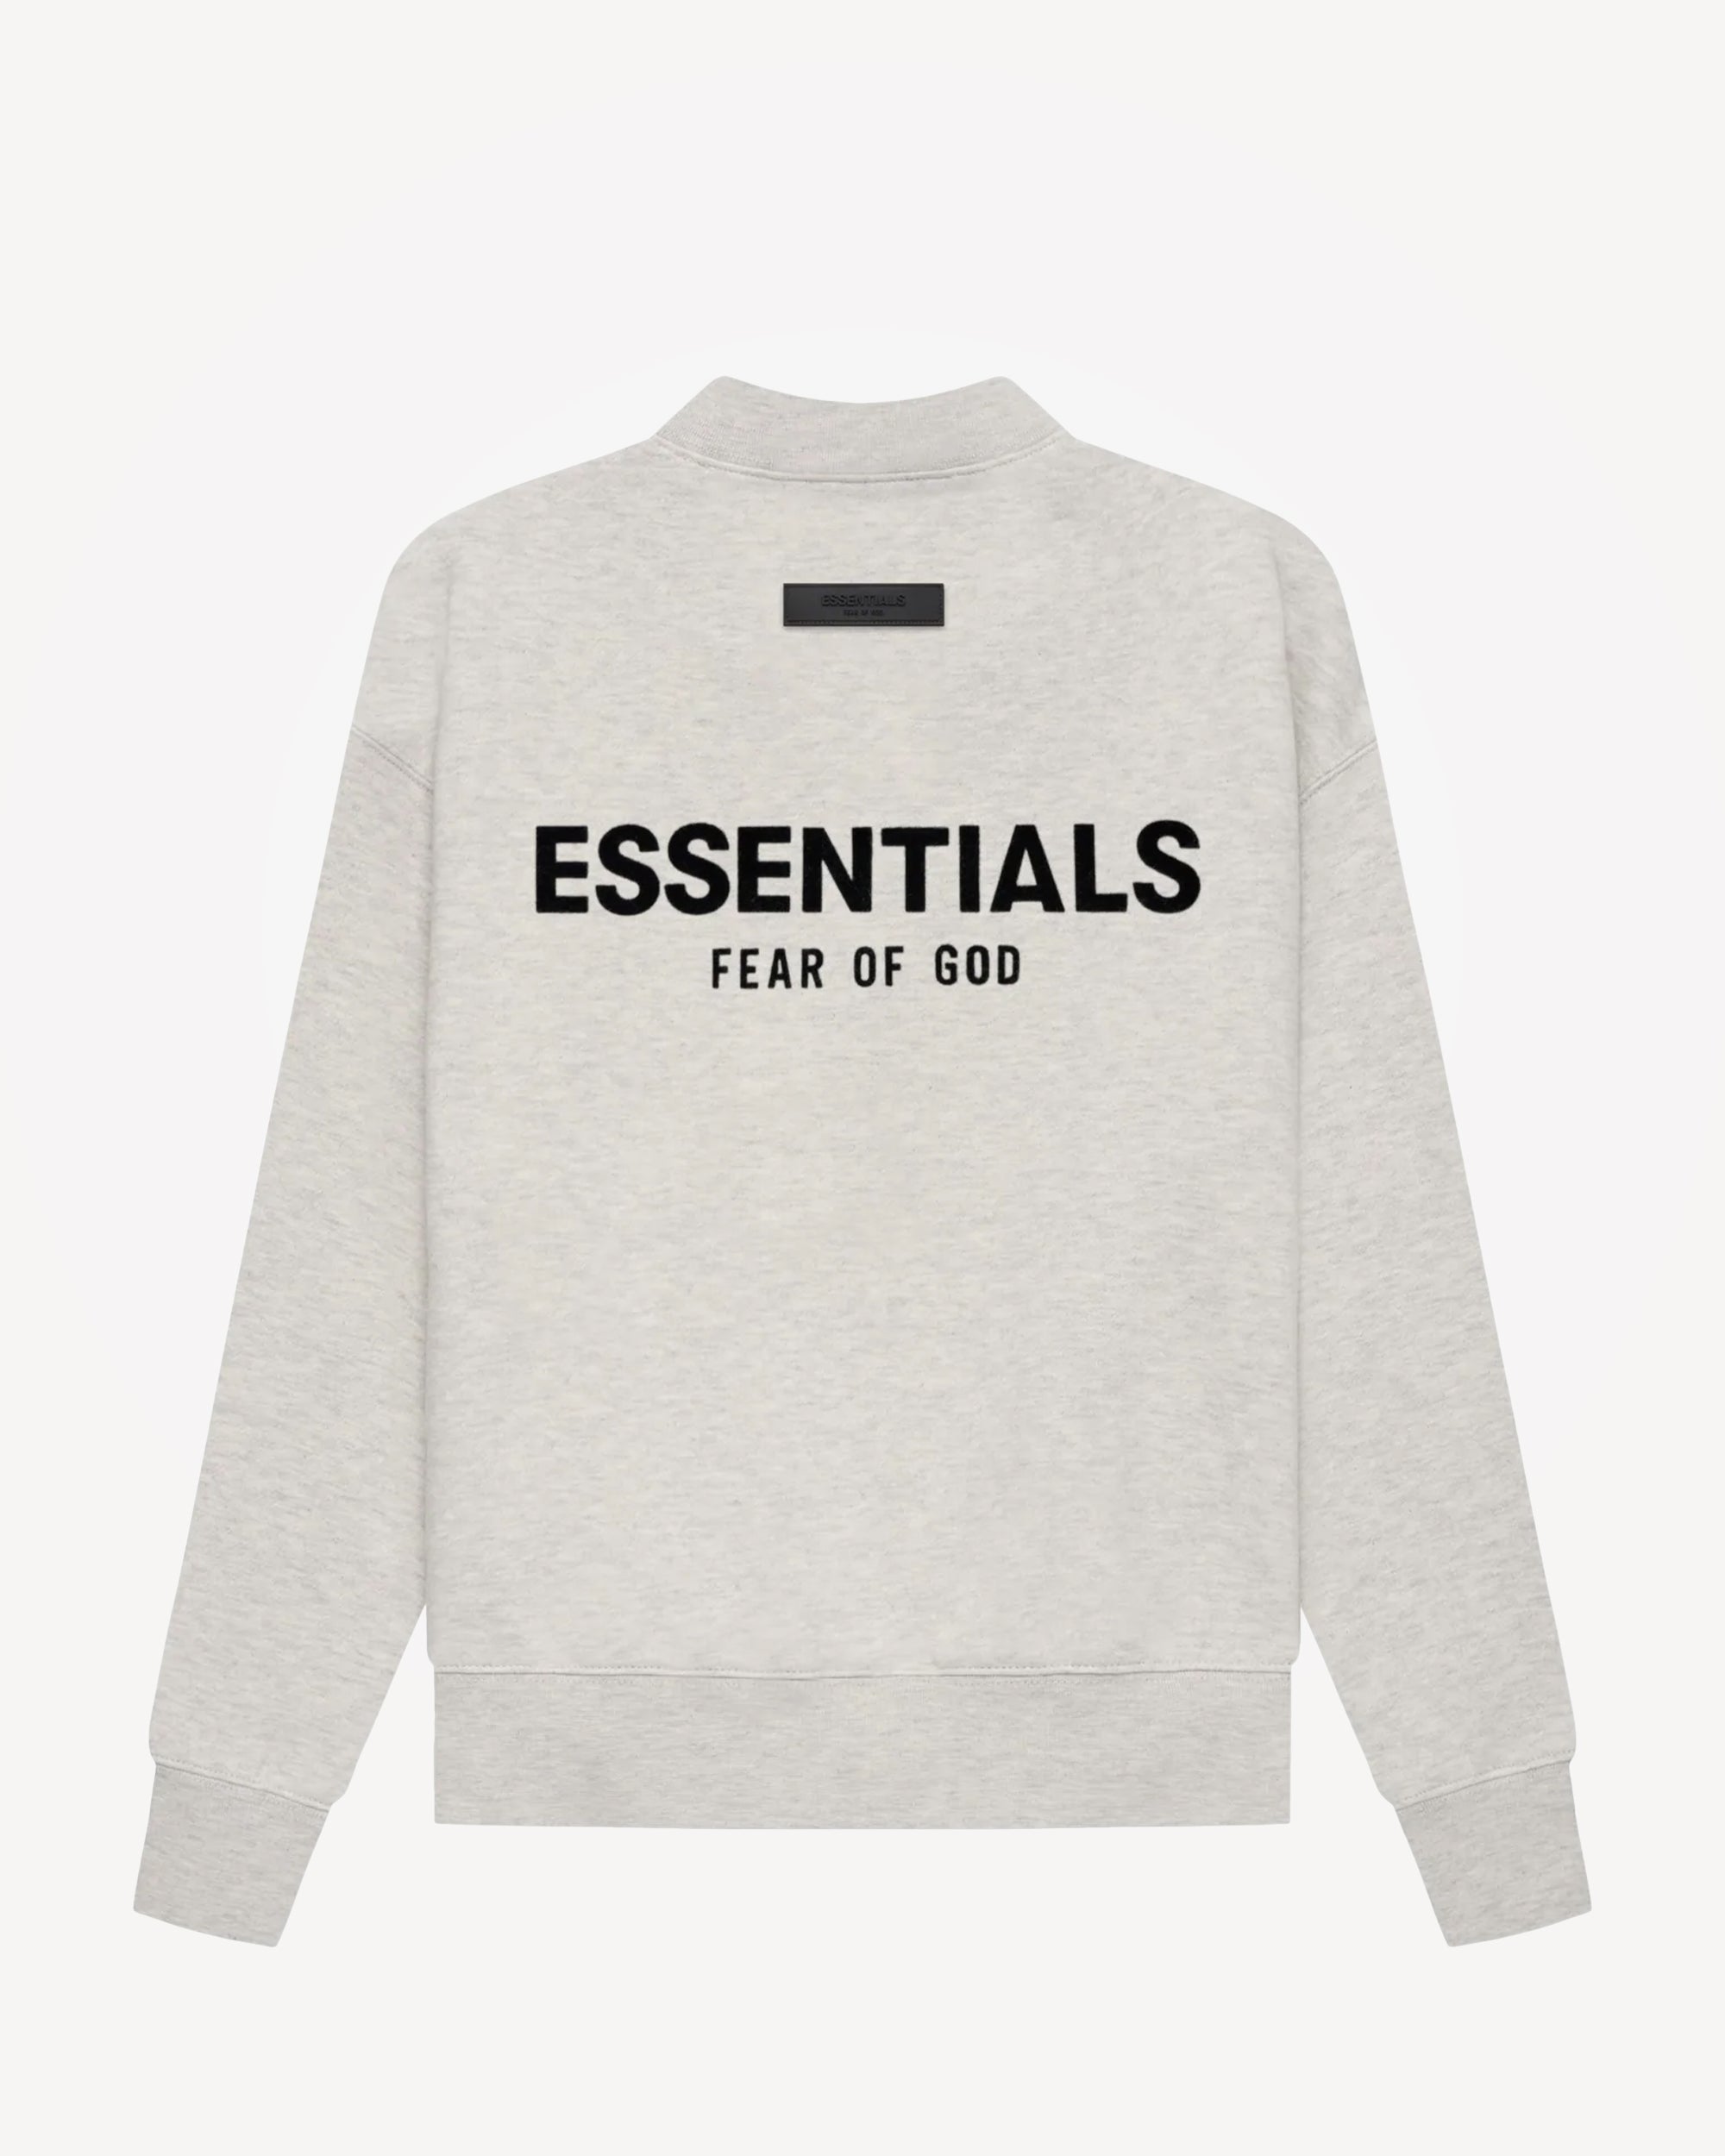 Kids' Core Collection Crewneck in Light Oatmeal